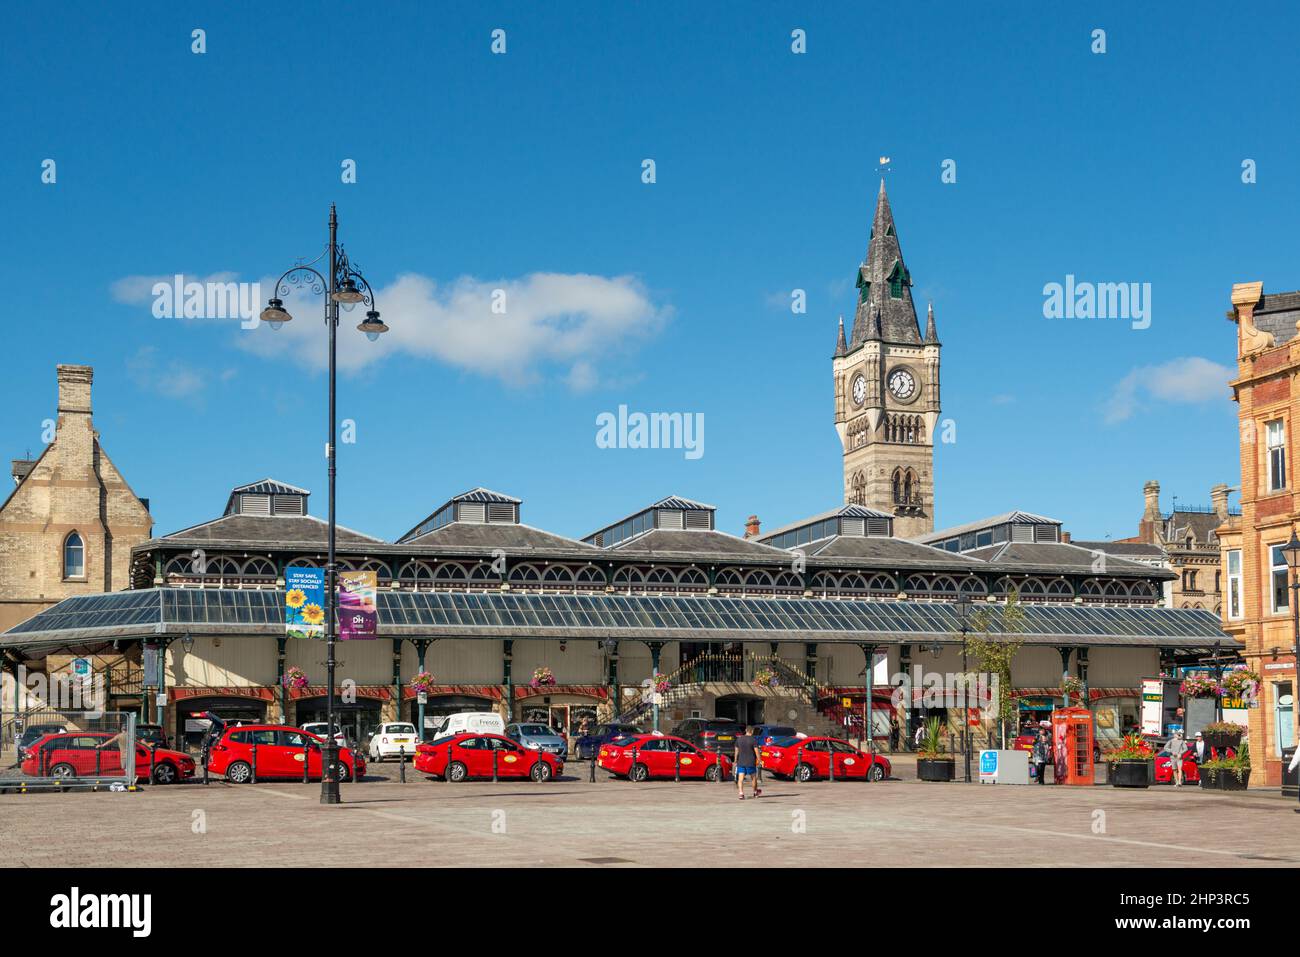 The market square, Market Hall and Clock tower in the centre of Darlington, County Durham Stock Photo